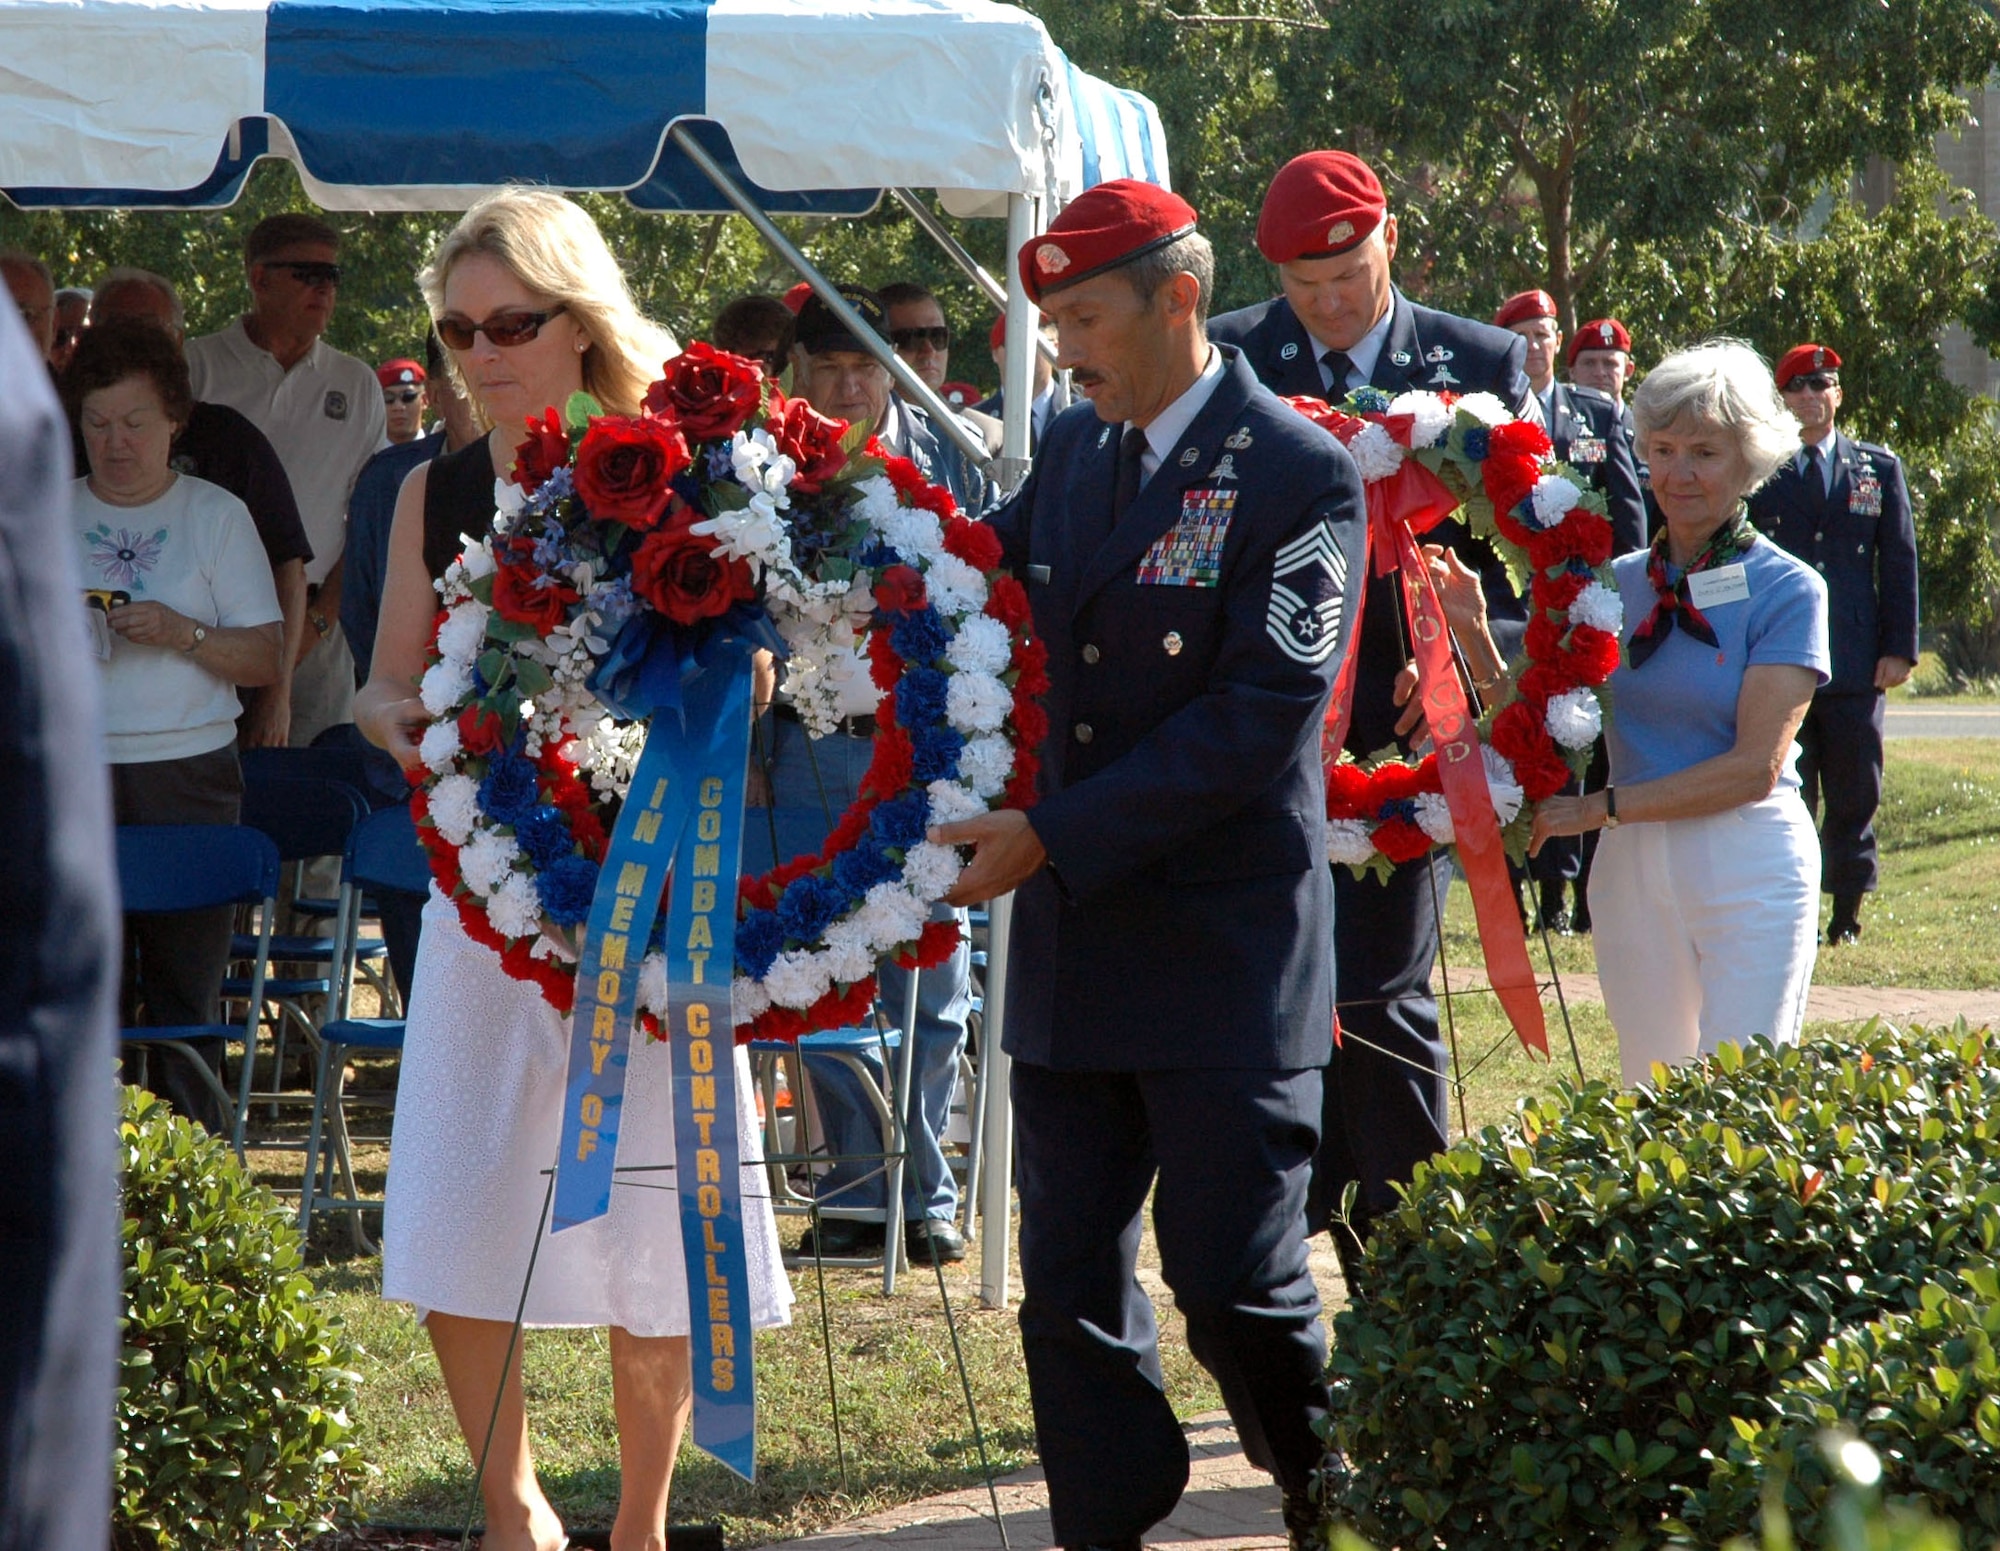 Valerie Chapman (left), widow of fallen combat controller and Air Force Cross recipient Tech. Sgt. John Chapman, and Doris Maitland, sister of Andre Guillet, listed as missing in action from the Vietnam War, lay wreaths in honor of all the fallen controllers during the Combat Control Association reunion Nov. 3 at Hurlburt Field, Fla. Assisting the family members are Chief Master Sgt. Michael Ramos from the 720th Special Tactics Group, and Chief Master Sgt. Timothy Hoye from the 23rd Special Tactics Squadron. (U.S. Air Force photo/Dawn Hart)